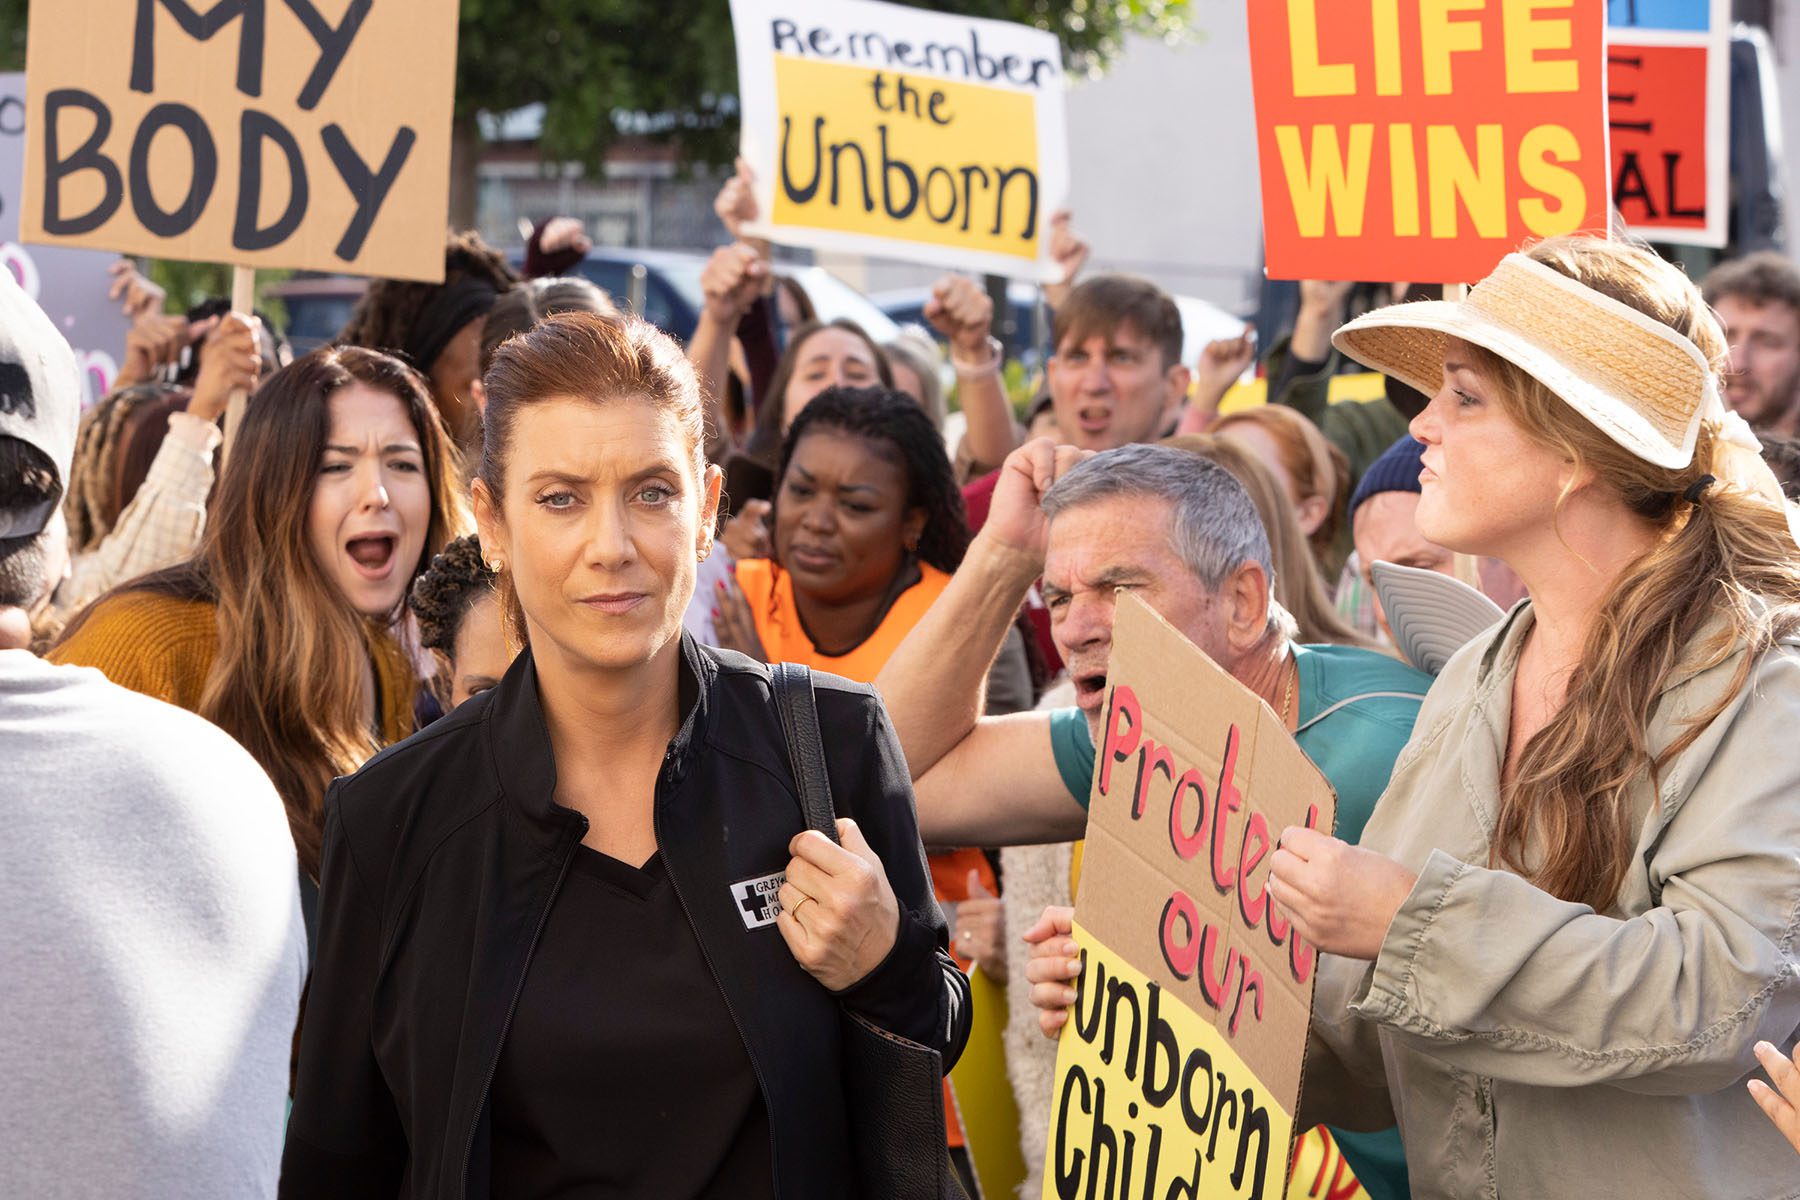 Still from an episode of TV show Grey's Anatomy in which a character is seen walking through a crowd of anti-abortion protesters.